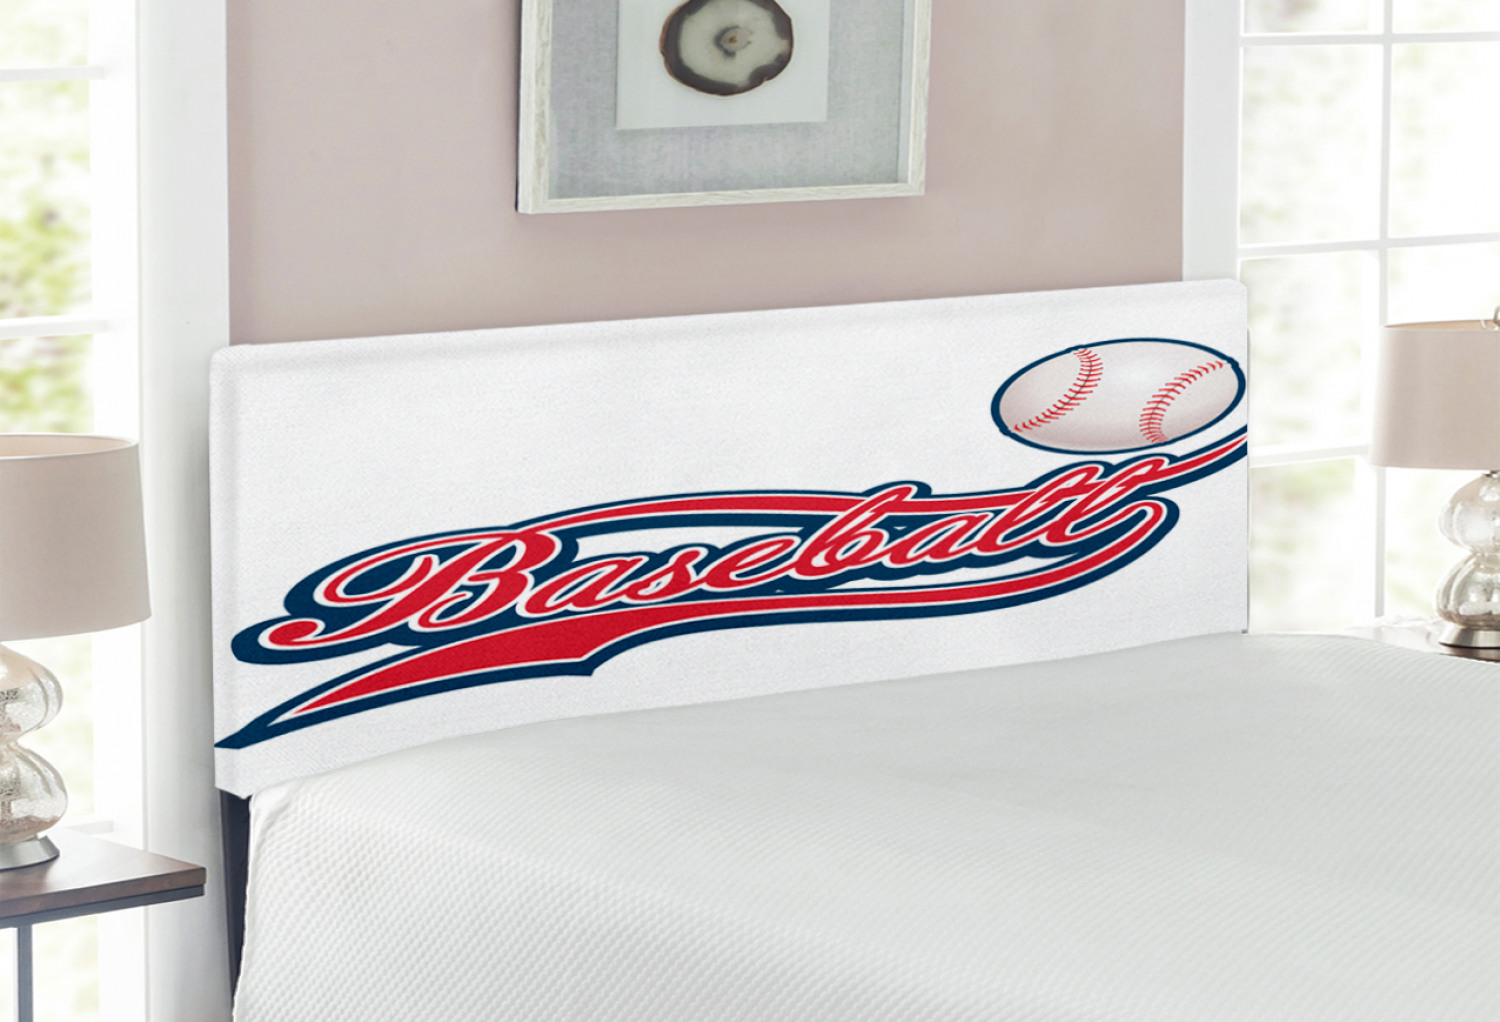 Sports Headboard, Baseball Ball Sporting Pastime National Sport Athleticism Entertainment, Upholstered Decorative Metal Bed Headboard with Memory Foam, Full Size, Night Blue Red White, by Ambesonne - image 2 of 4